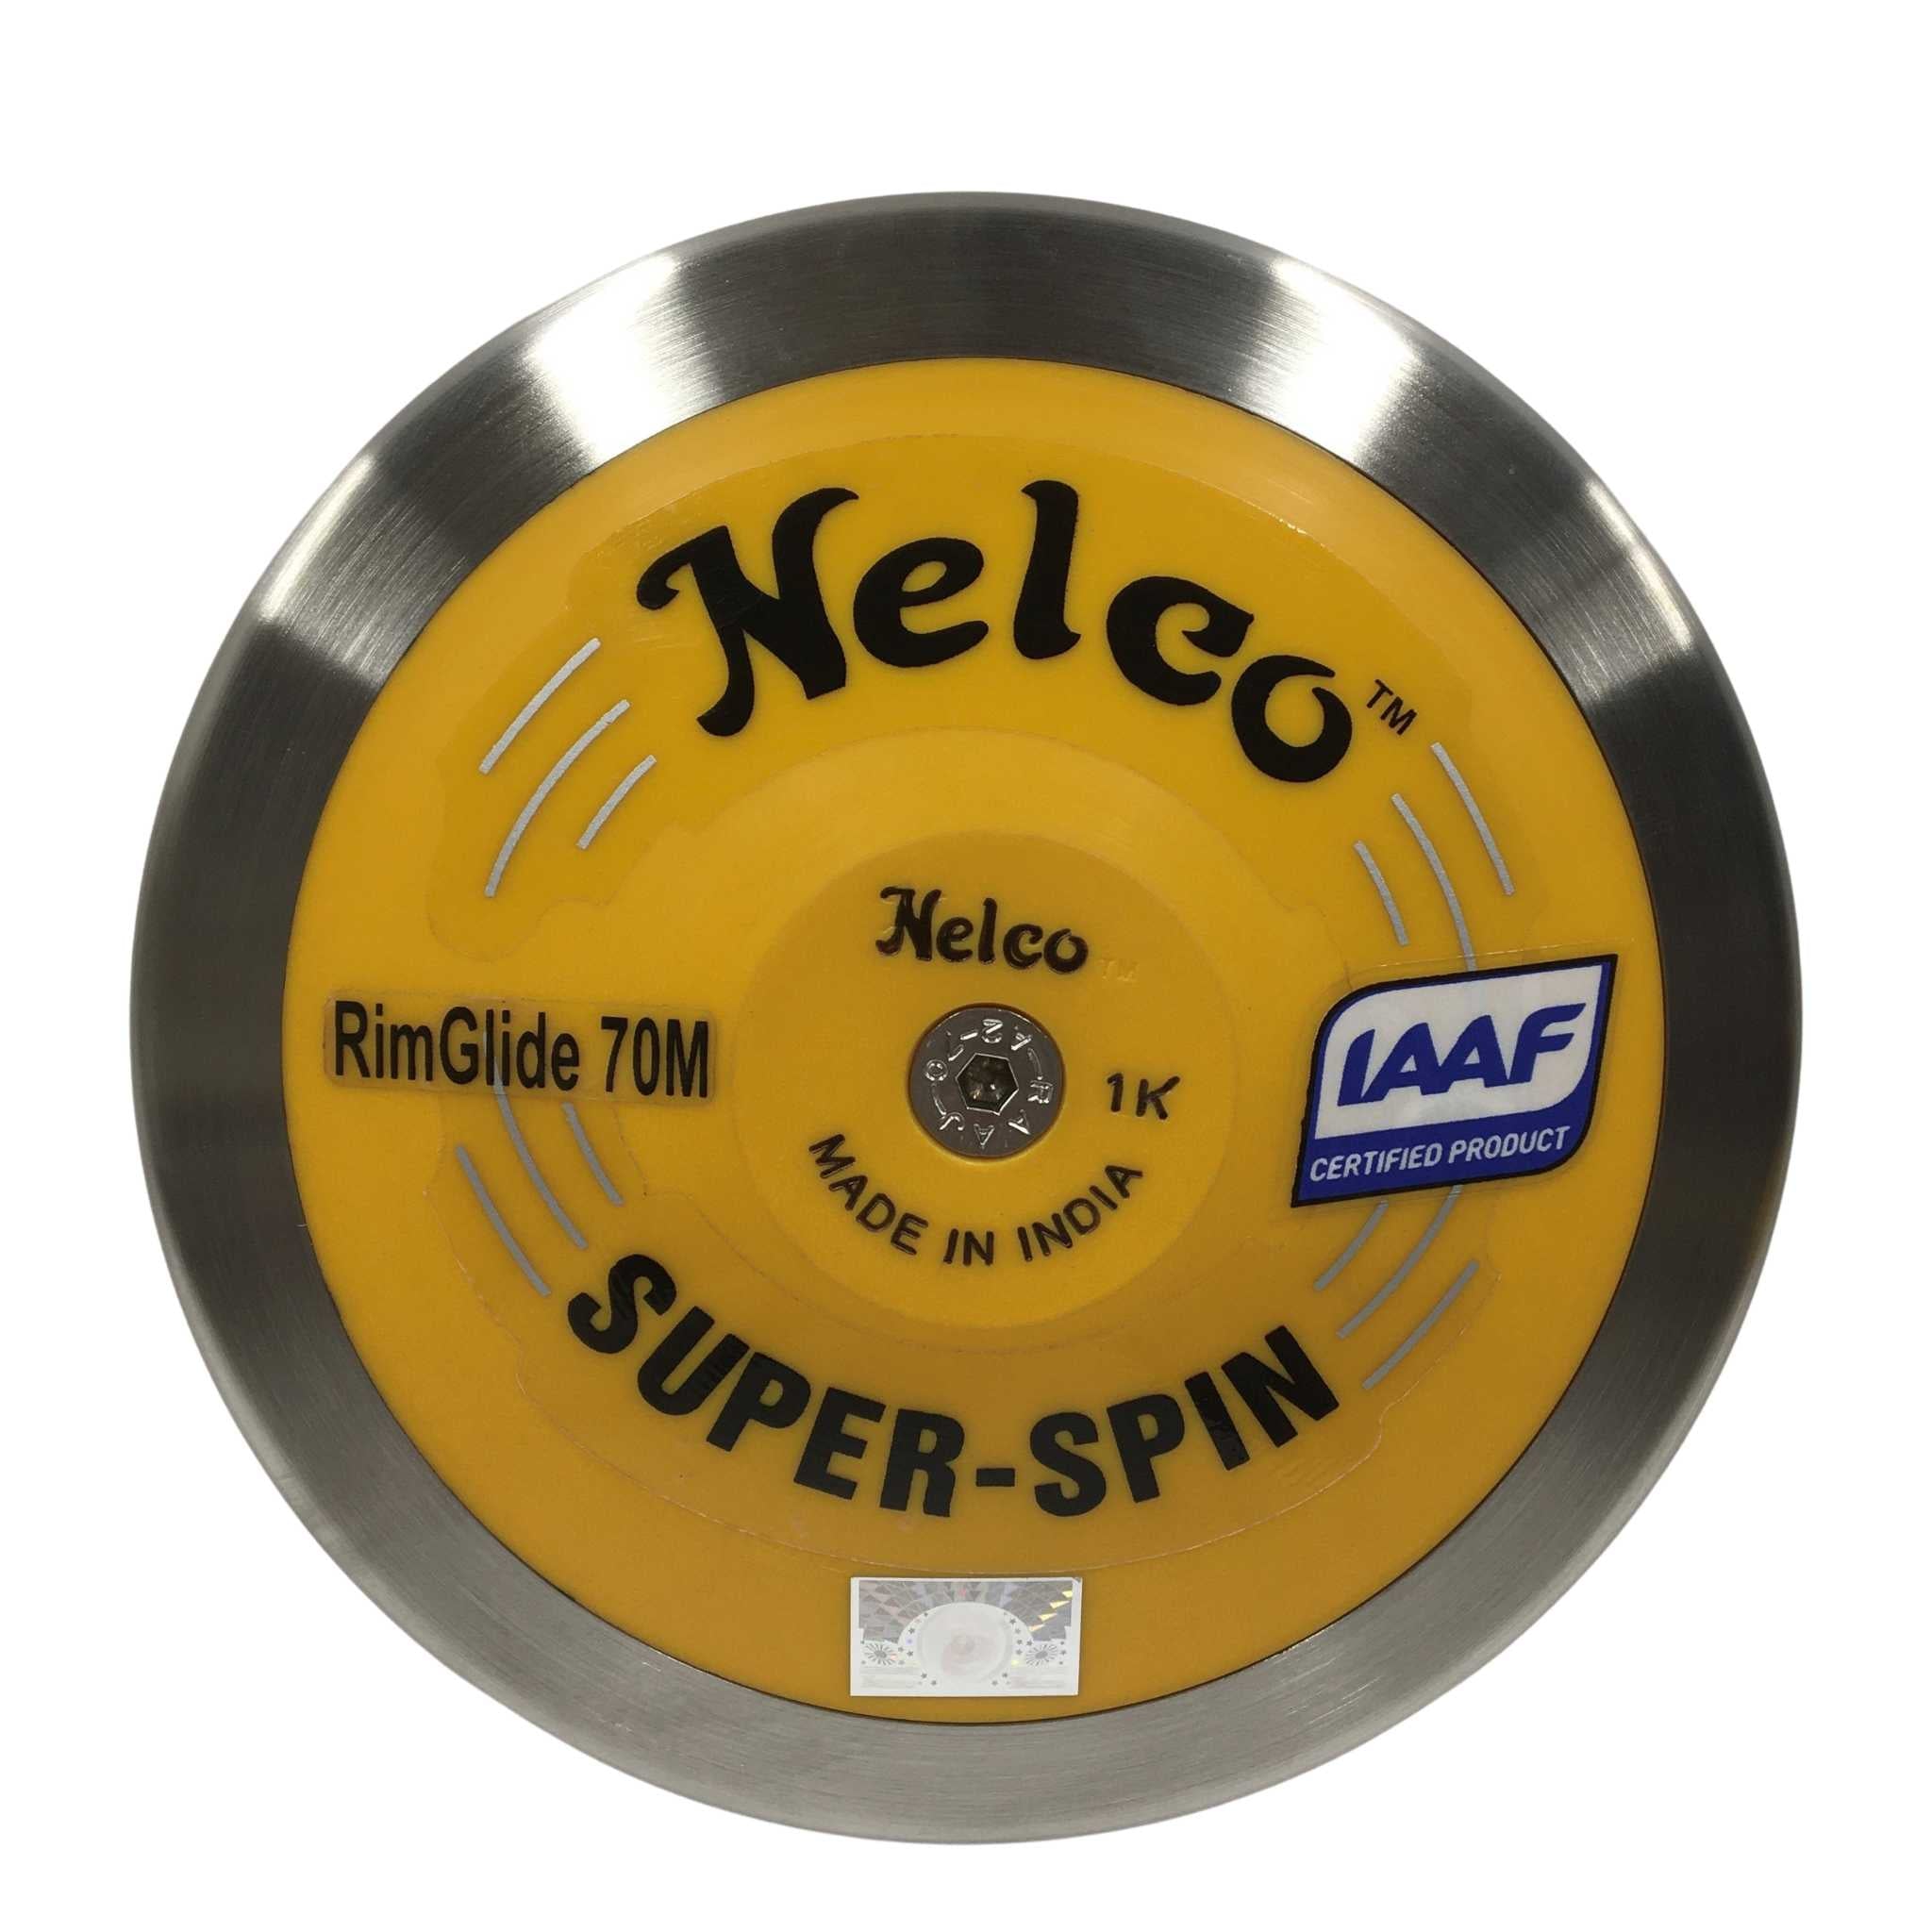 Nelco SuperSpin RimGlide 70 Discus | Yellow side plates with Alloy rims | WA certified